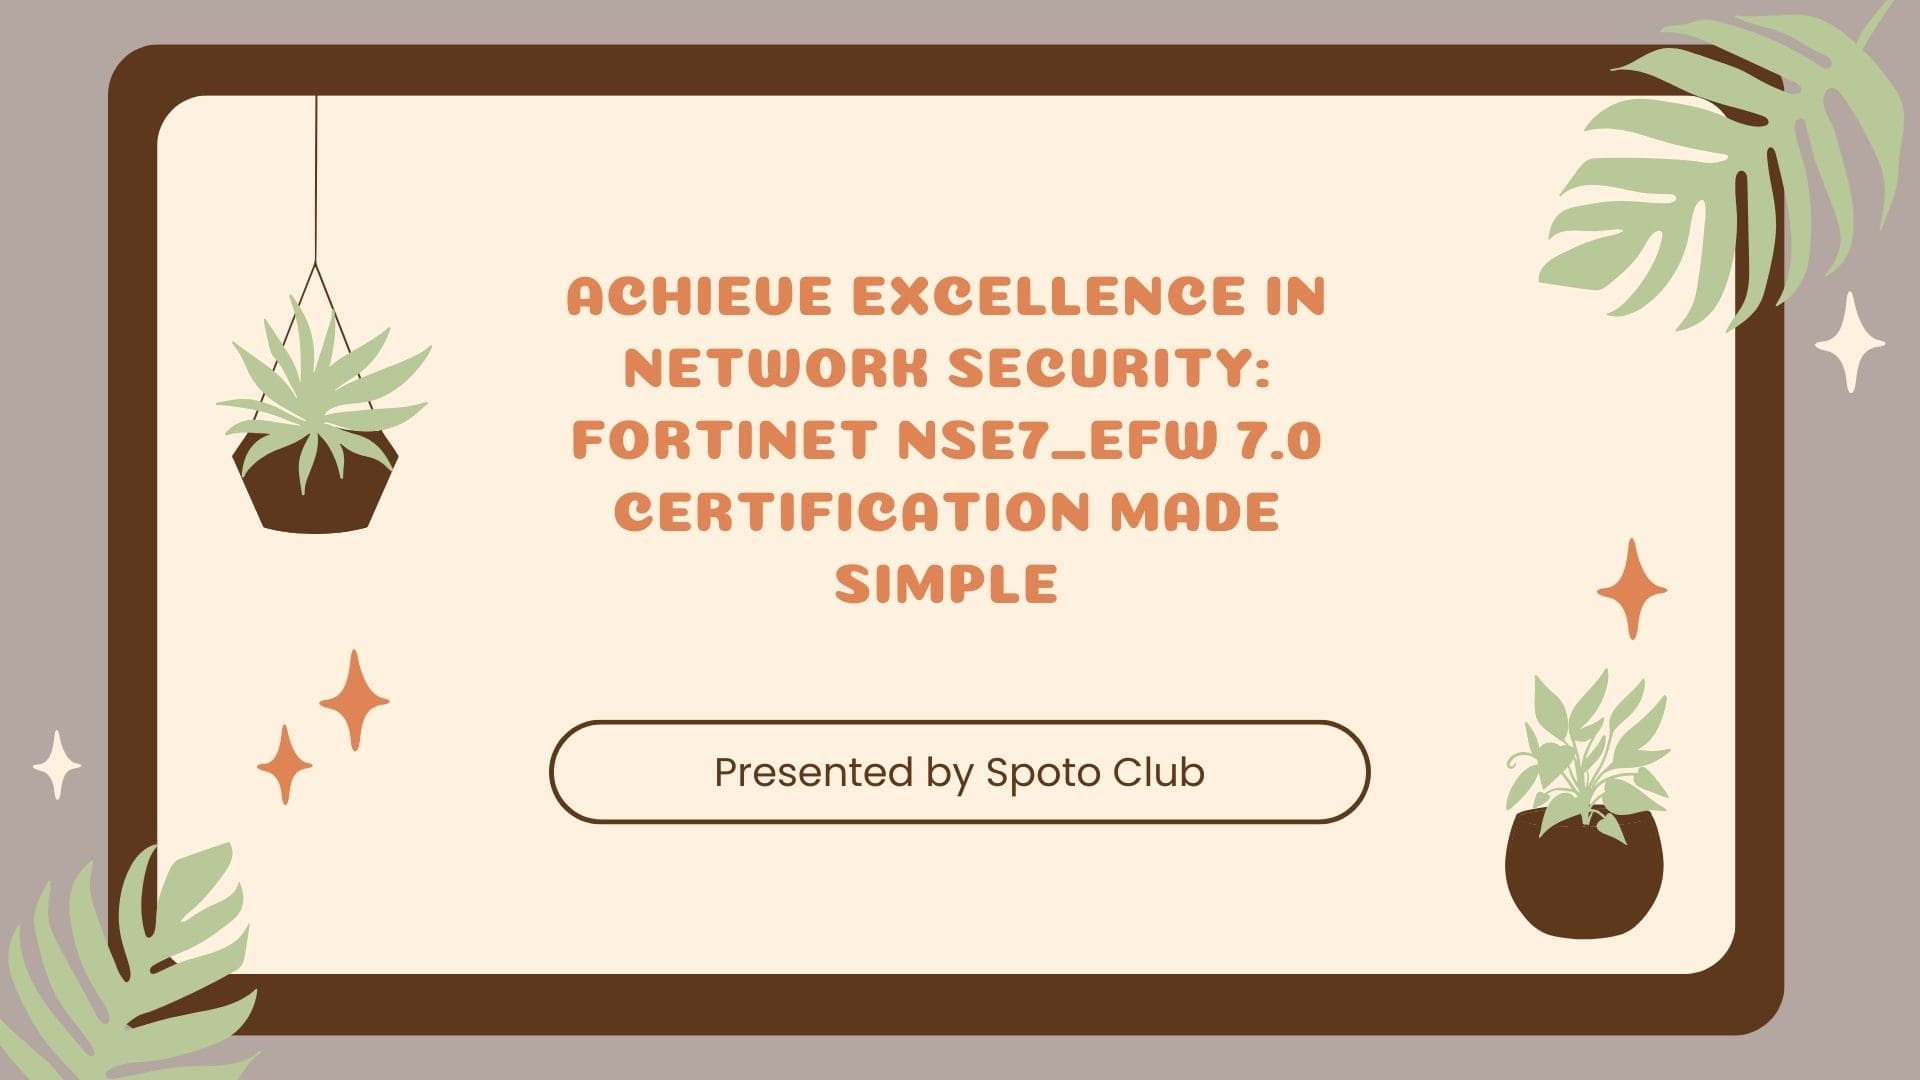 Fortinet NSE7_EFW 7.0 Certification